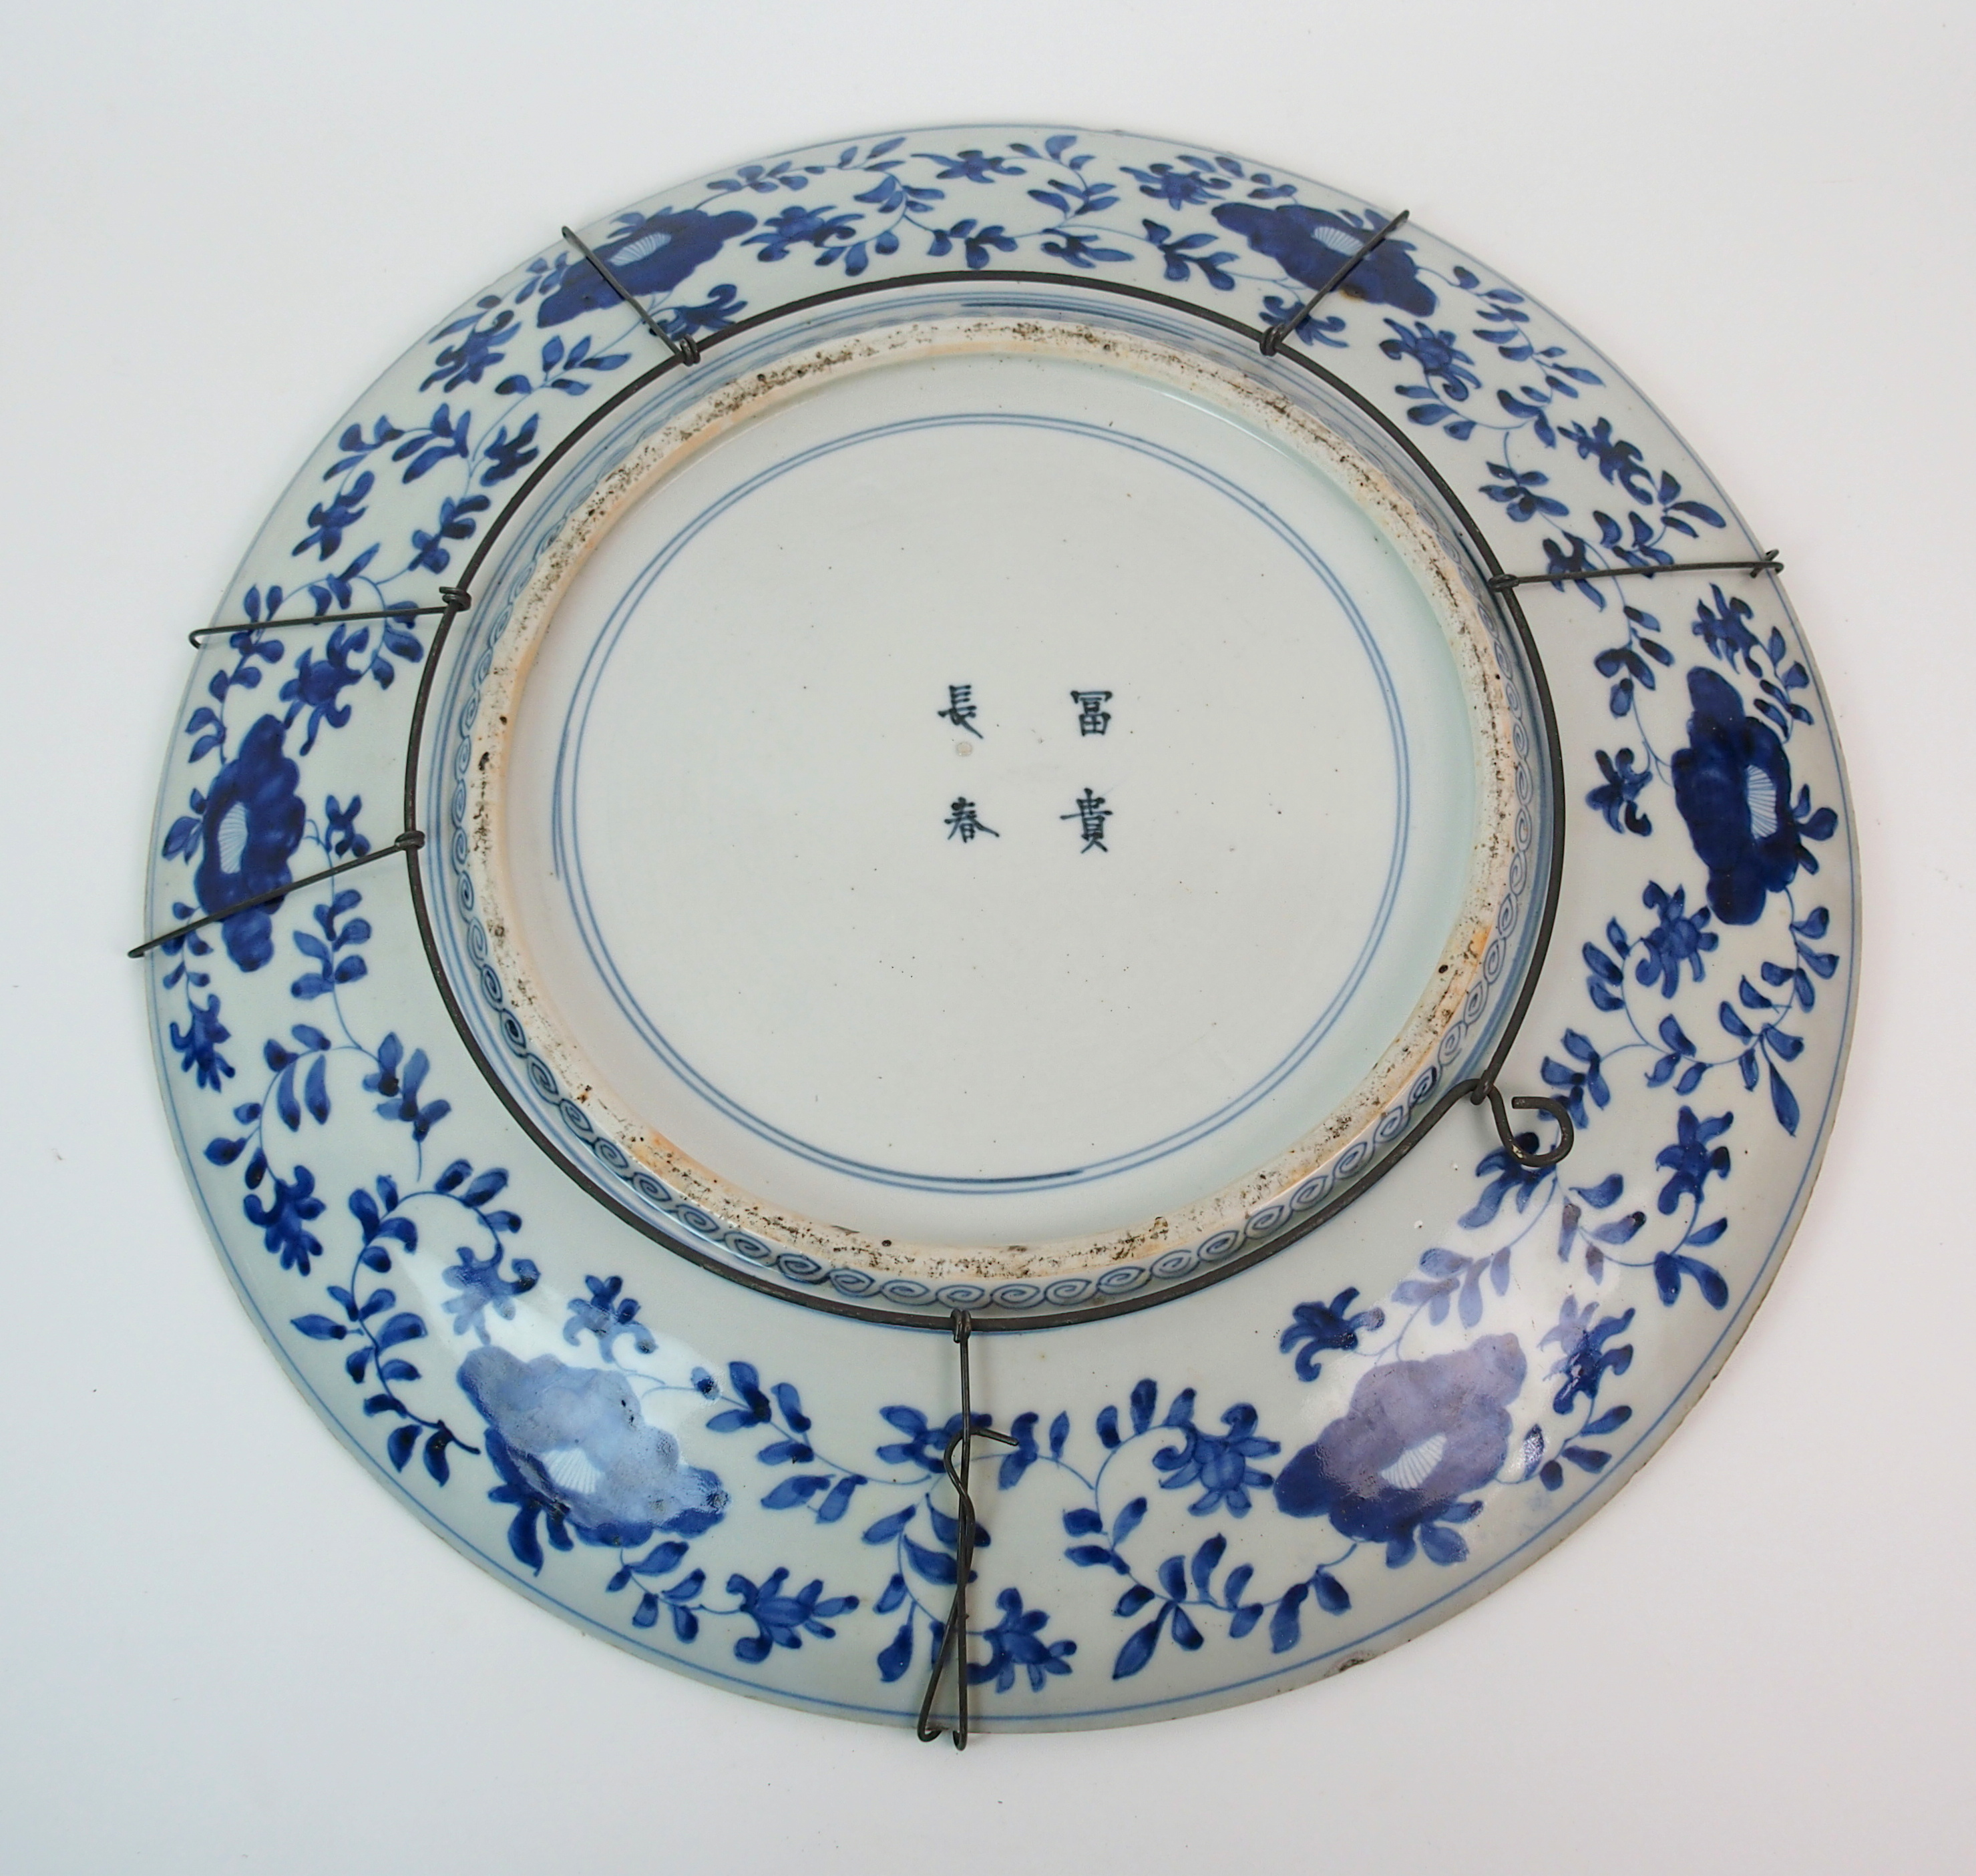 An Imari dish painted with fishermen, herons and a dragon (rim chips), signed, 50cm diameter - Image 8 of 10